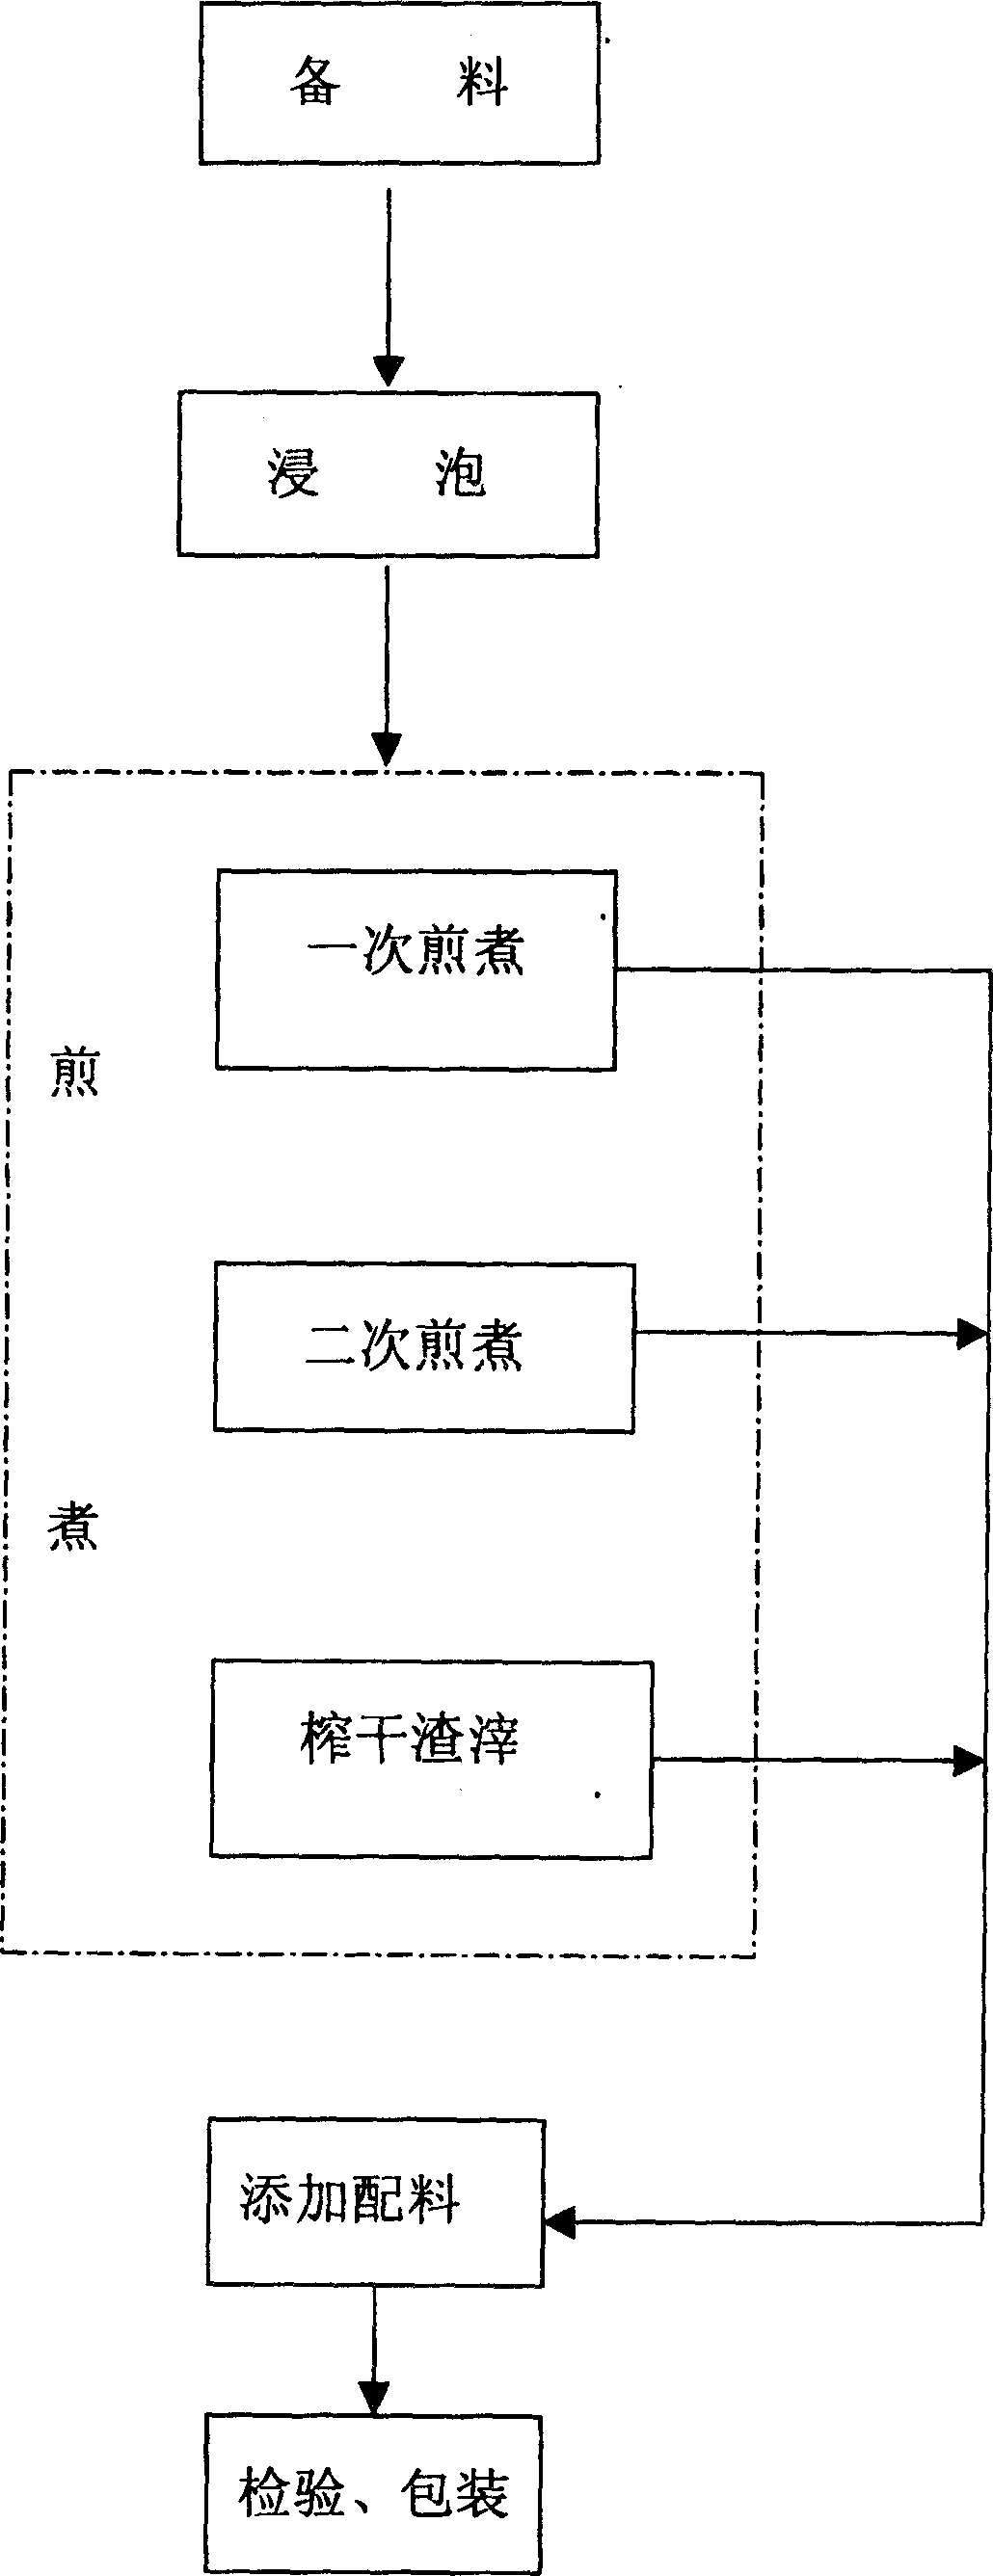 Production process for a liquid seasoning and products processed by the same technology